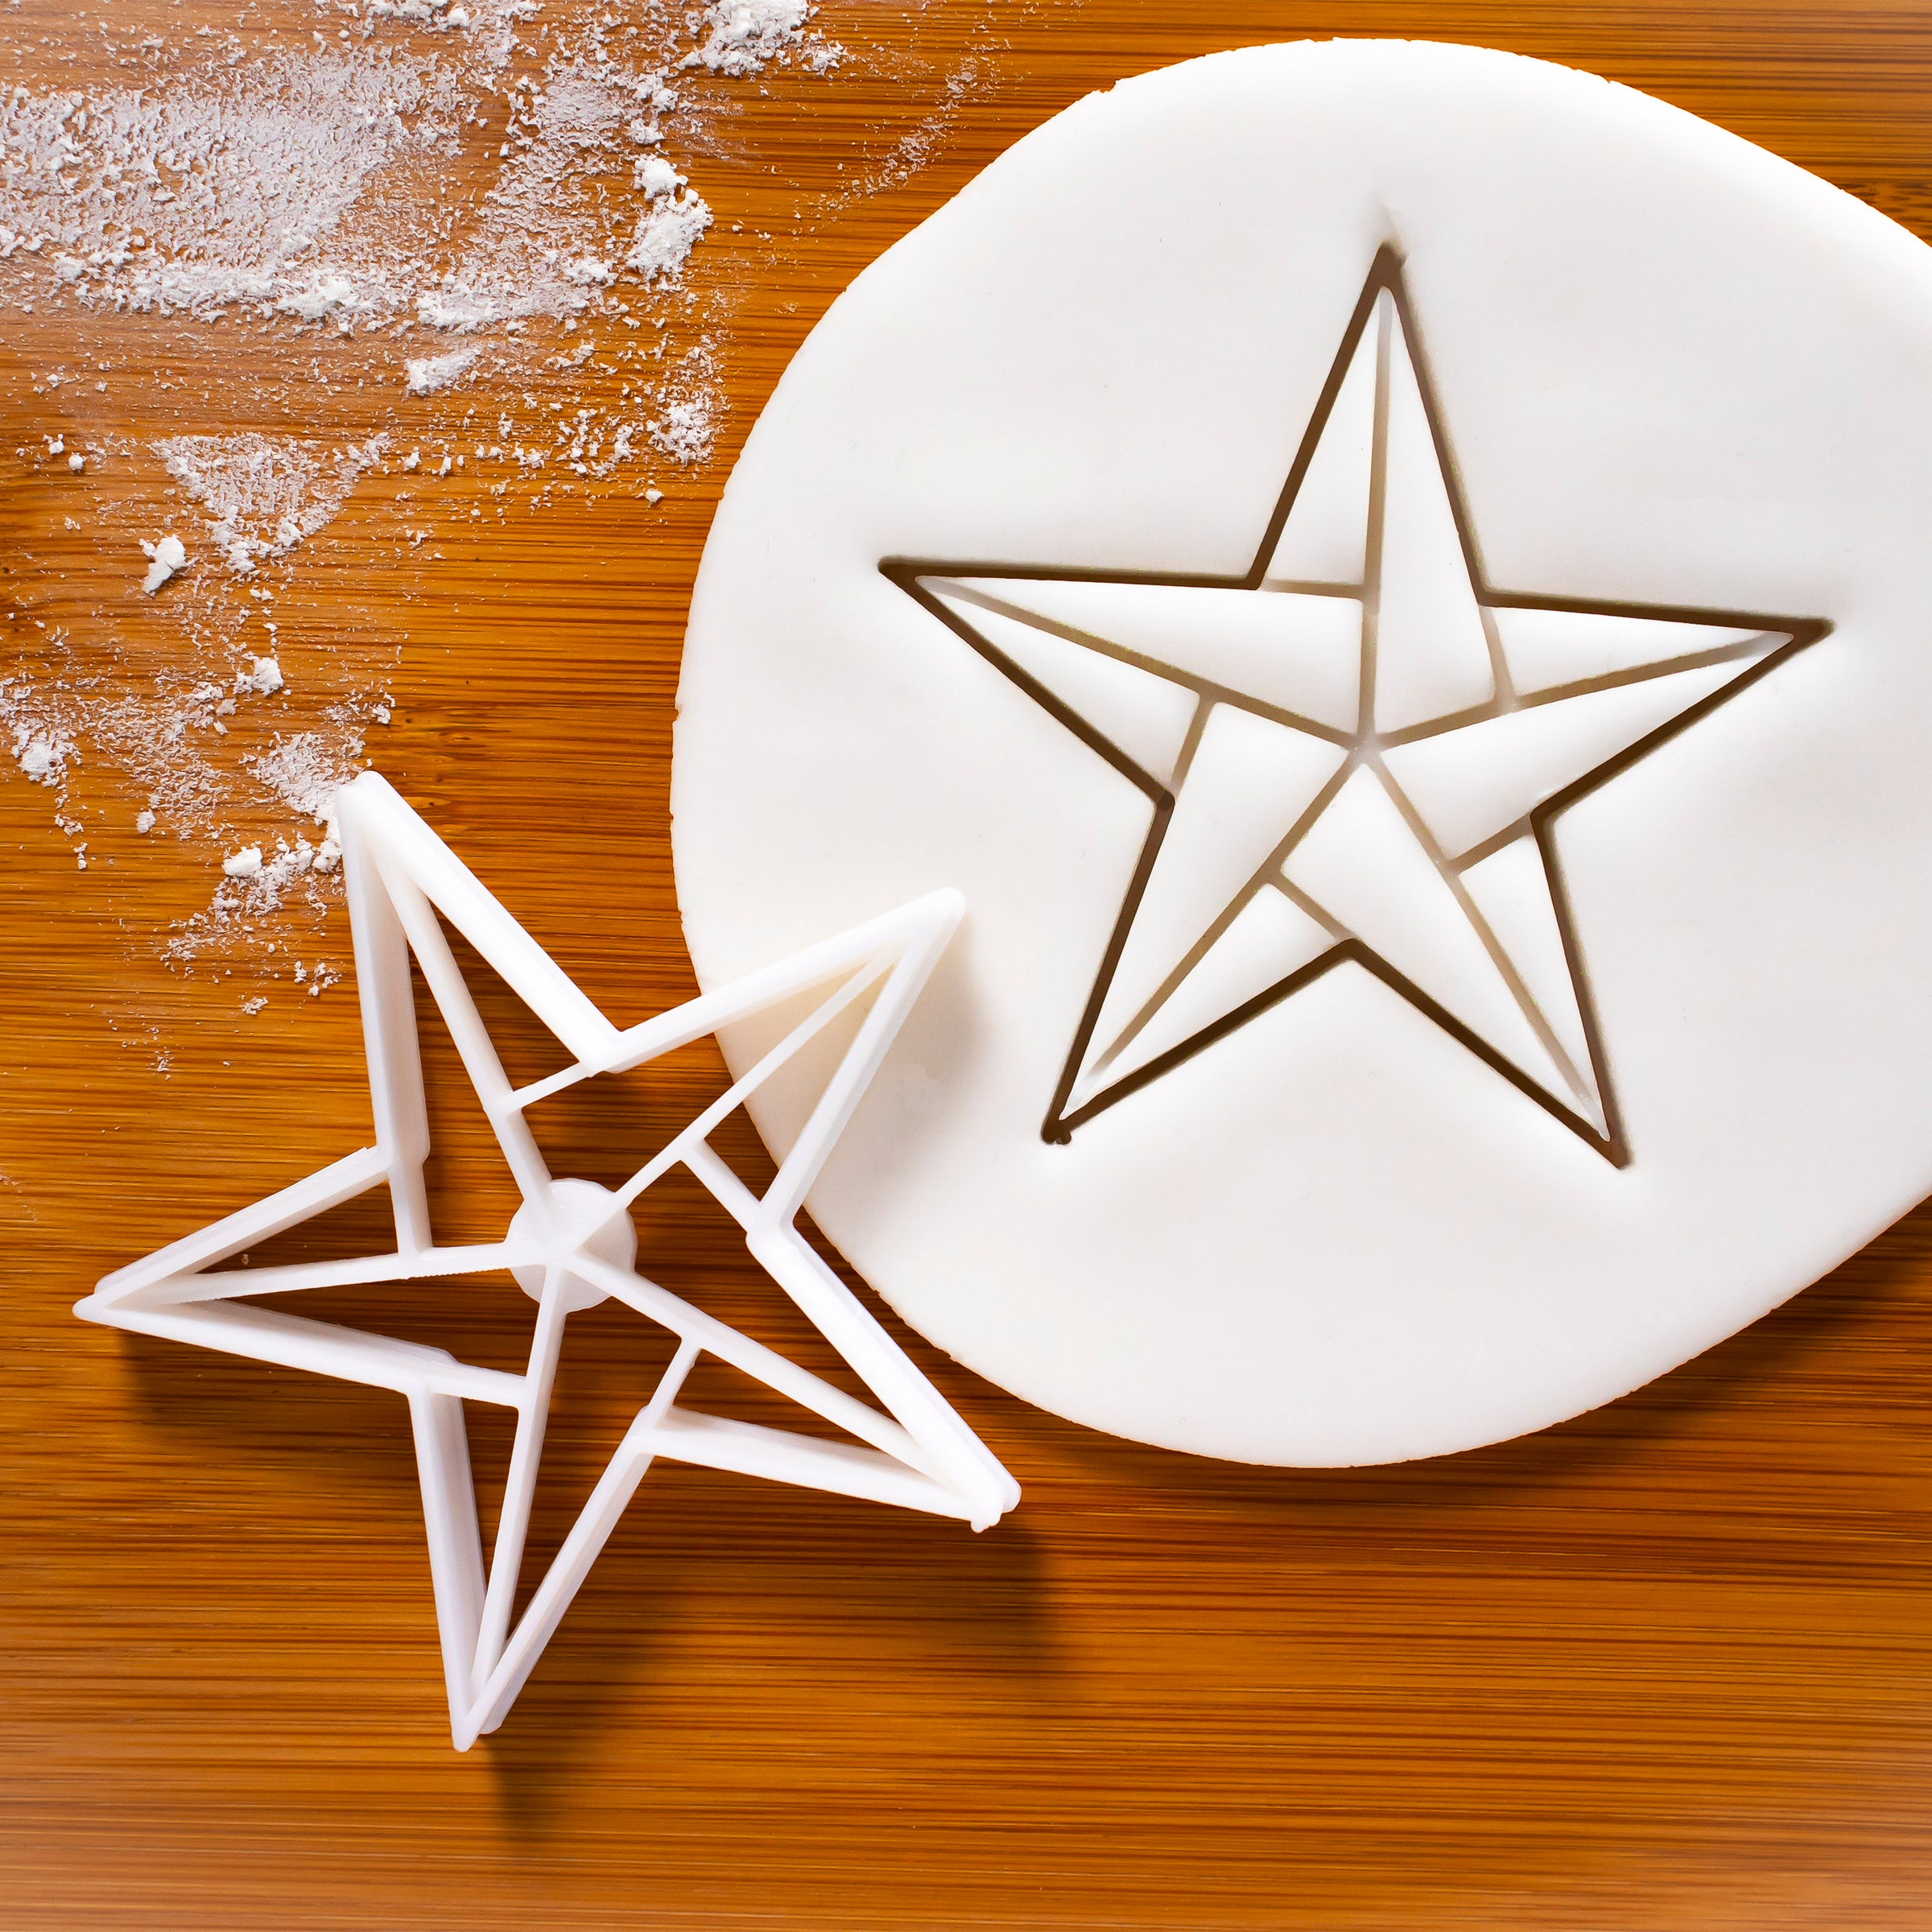 5 Sided Origami Star Cookie Cutter